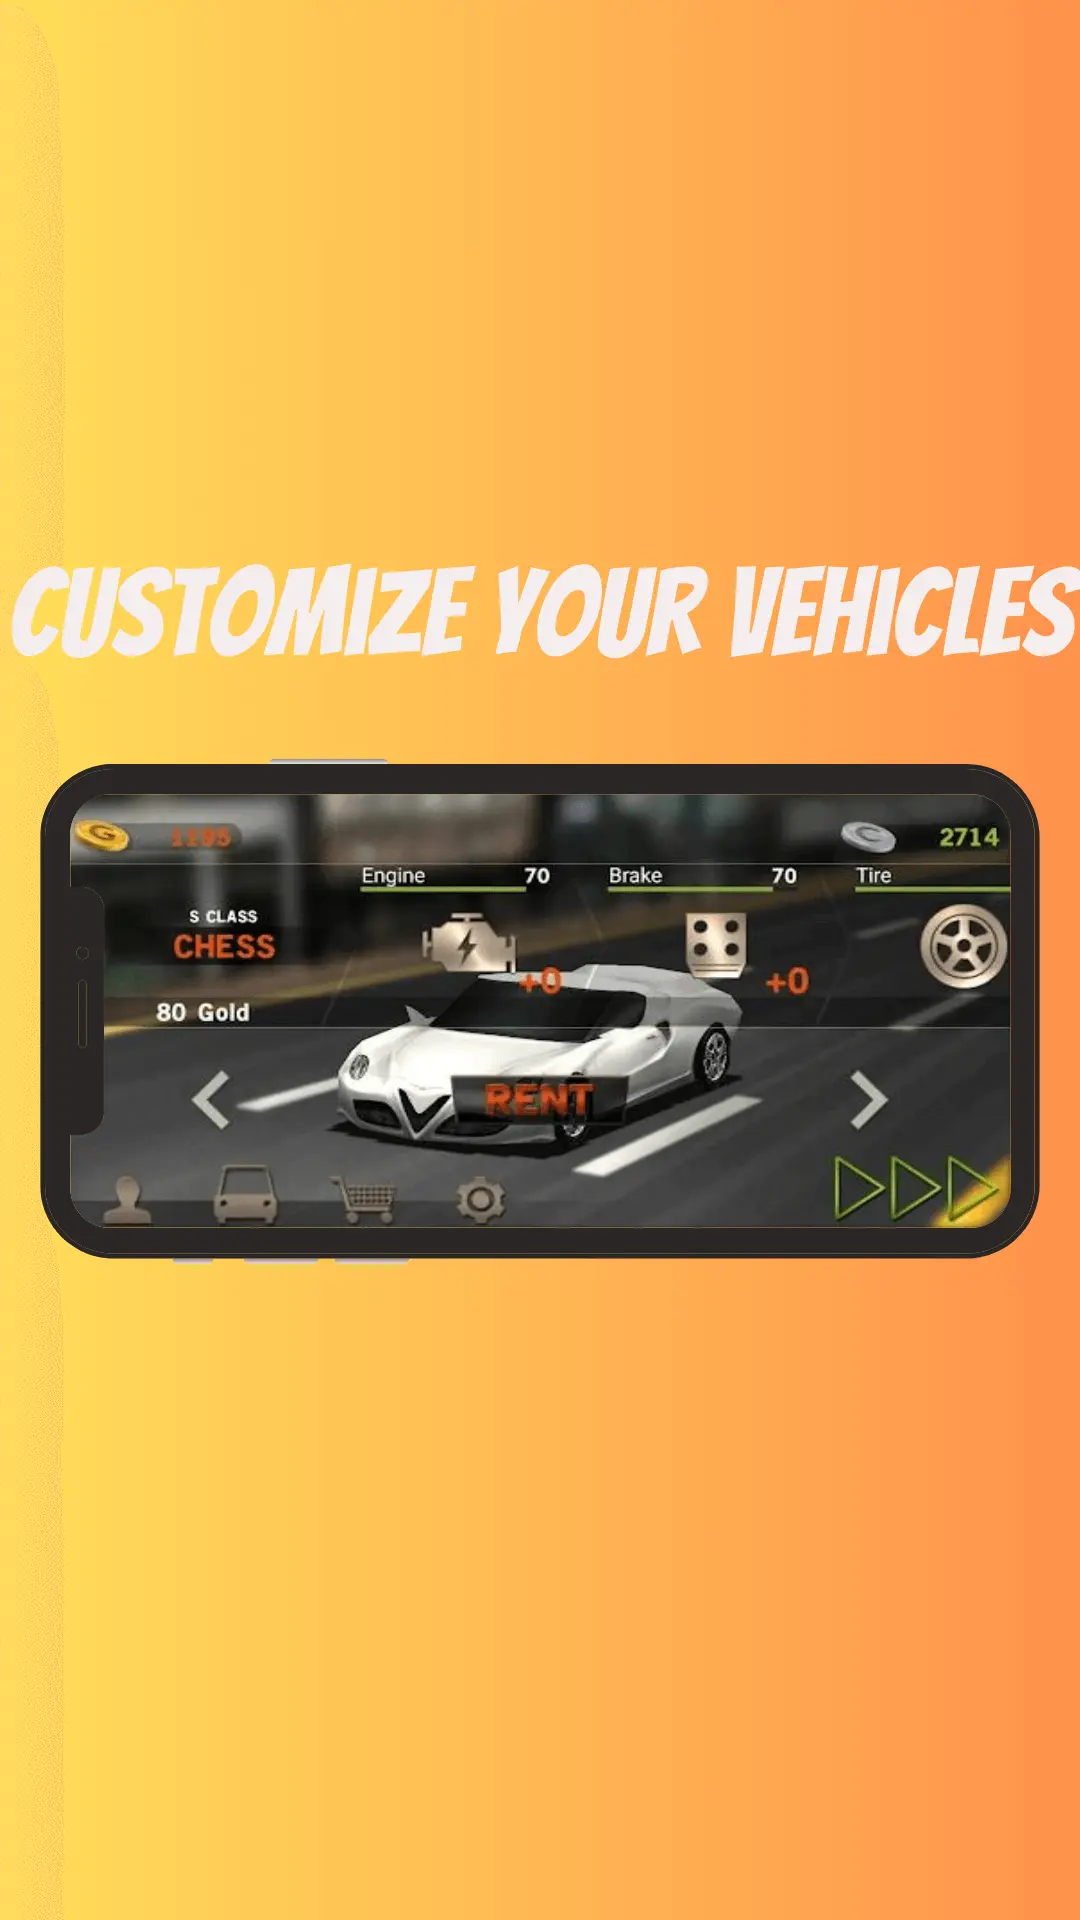 CUSTOMIZE YOUR VEHICLES